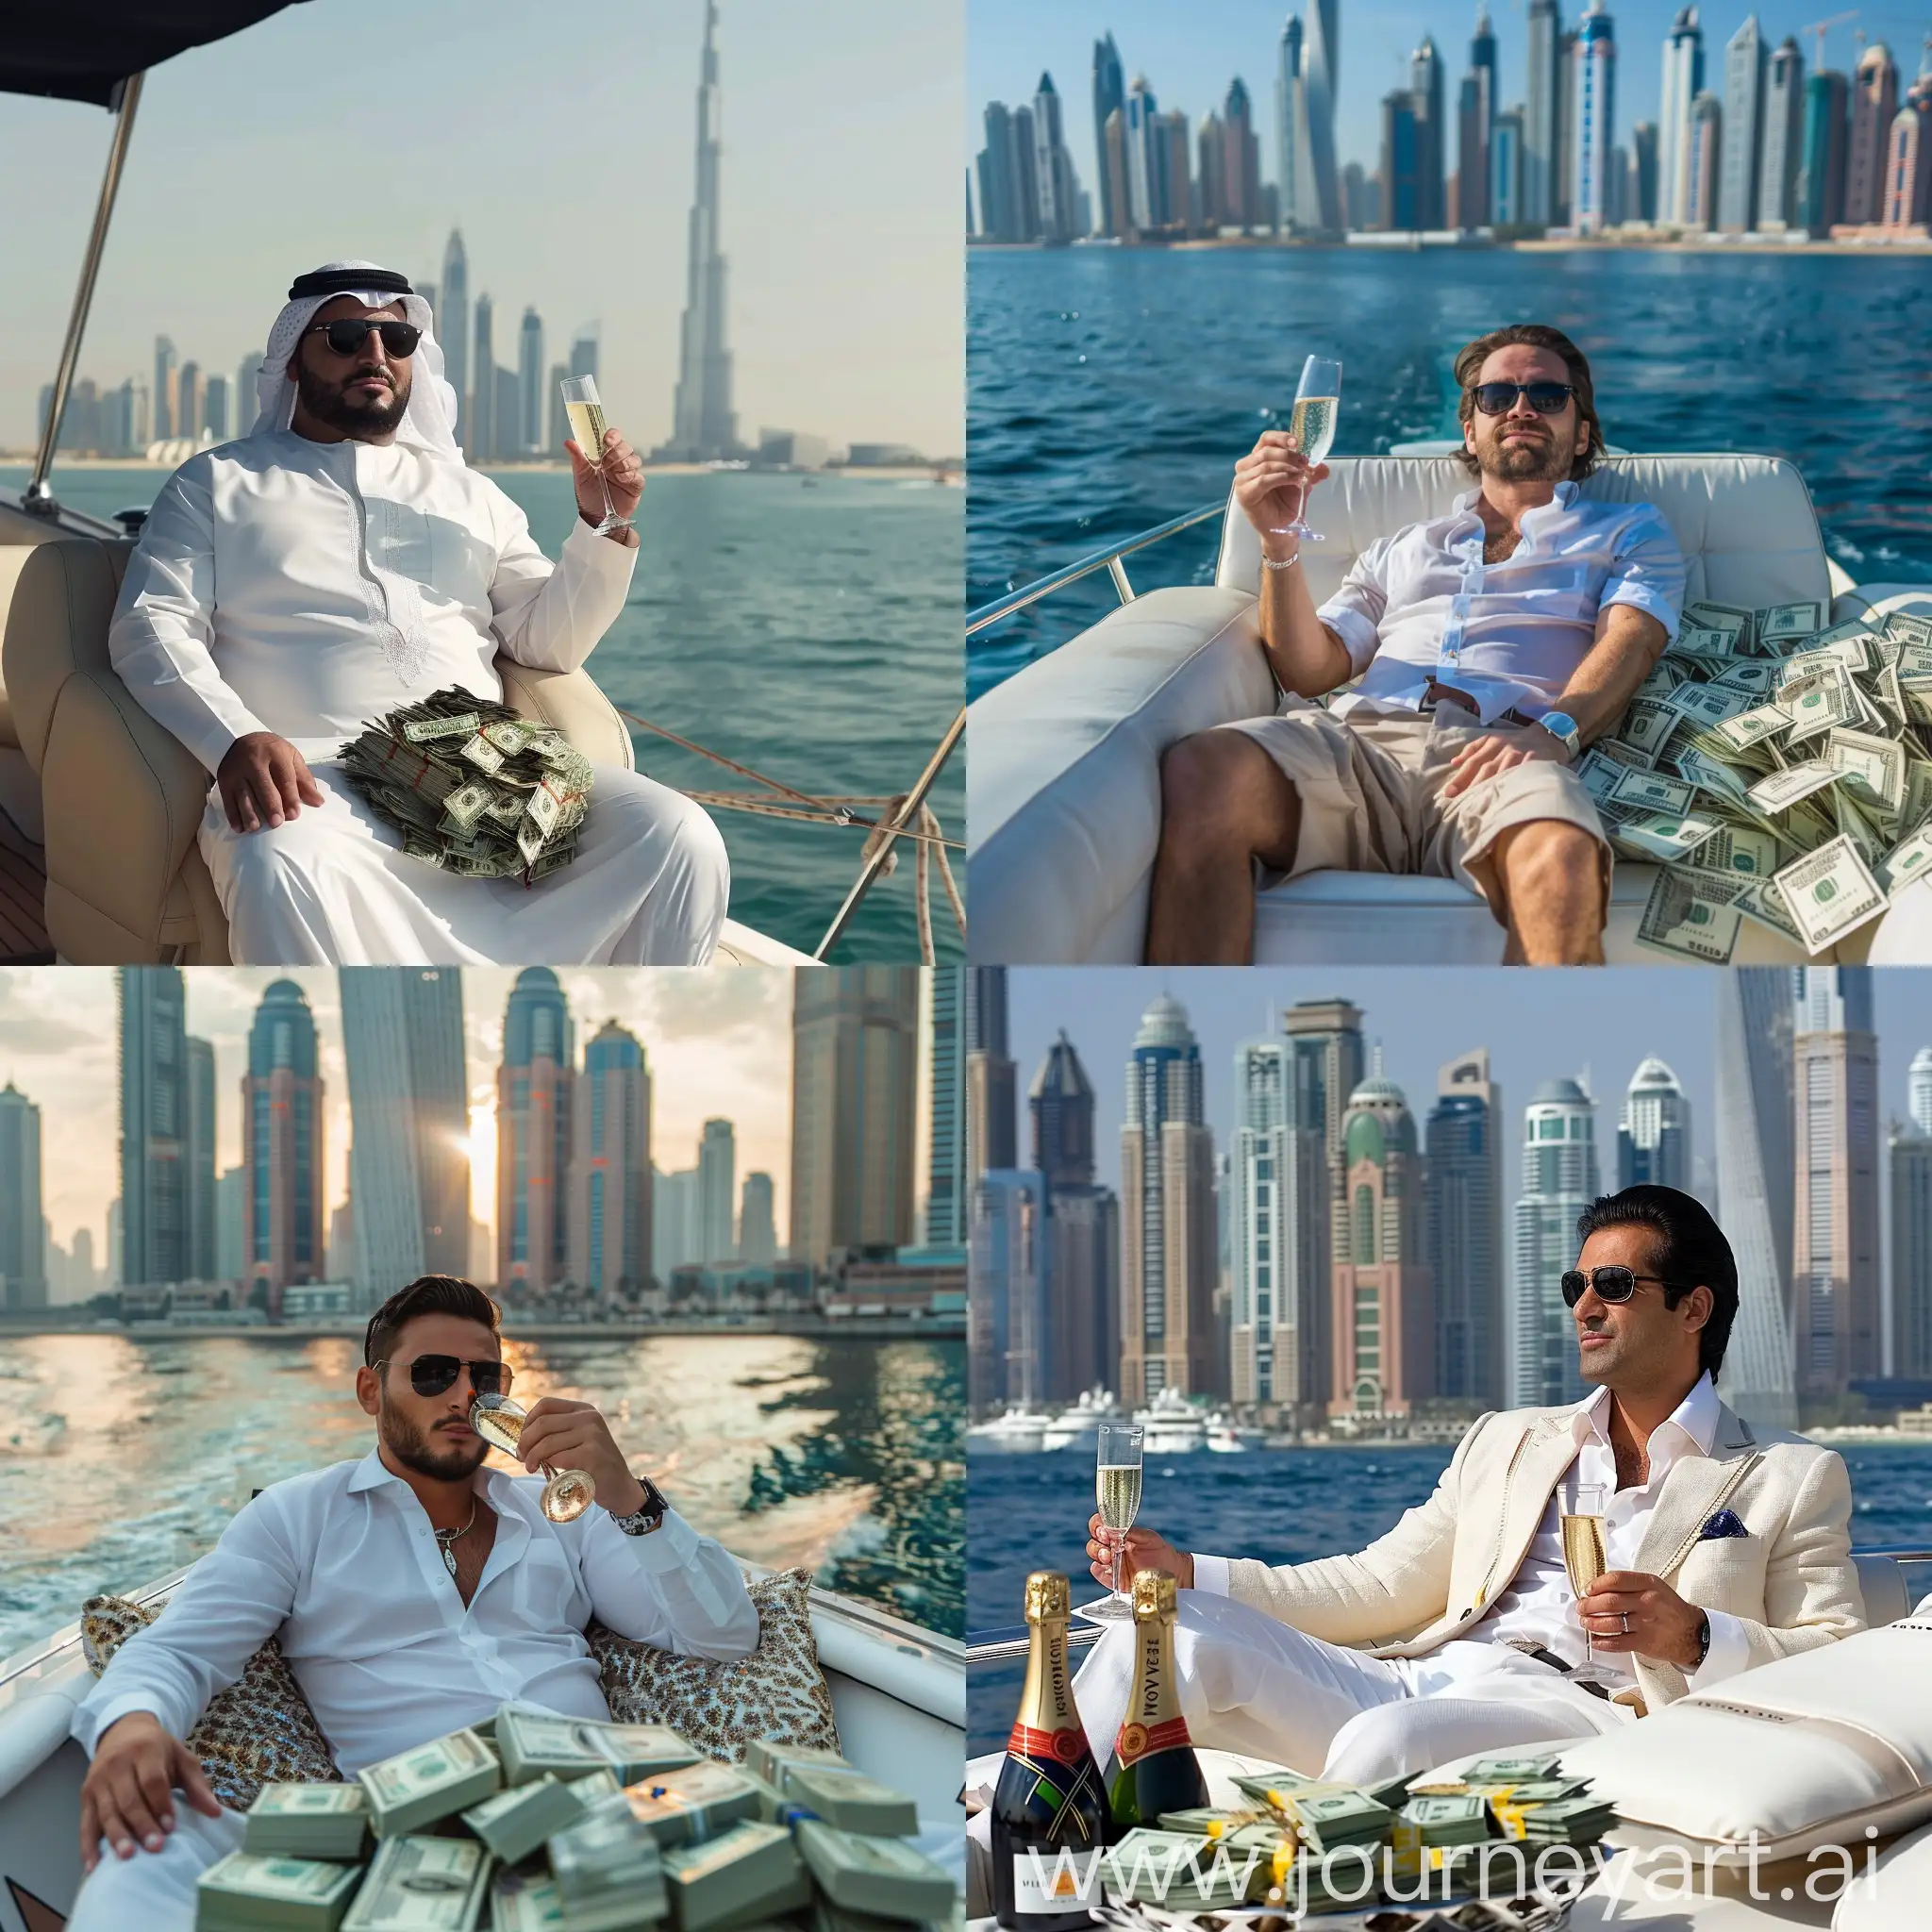 Wealthy-Man-Slipping-on-Yacht-with-Money-and-Champagne-in-Dubai